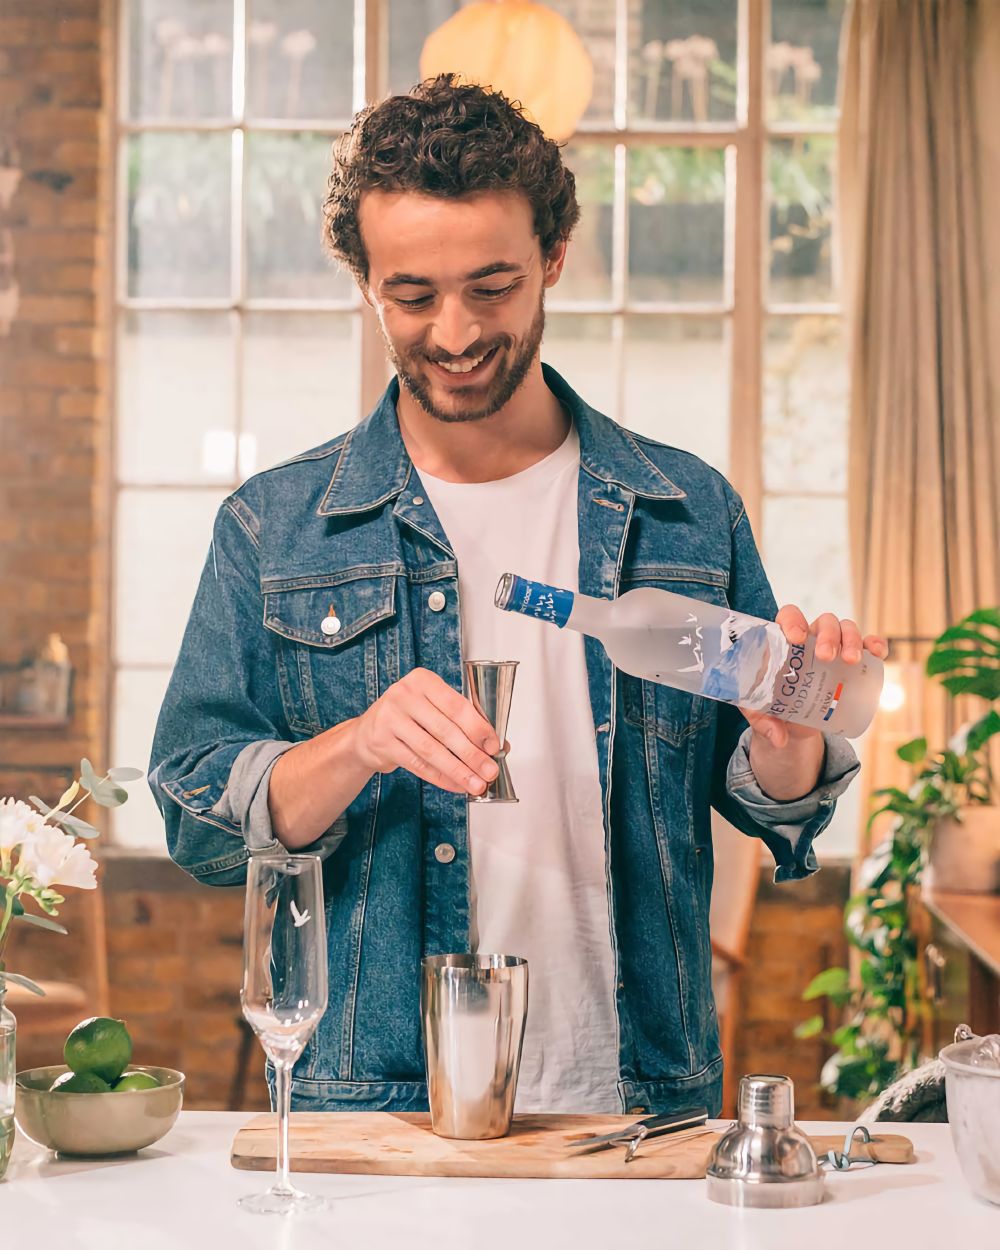 Man pouring Grey Goose in an apartment with a denim jacket.